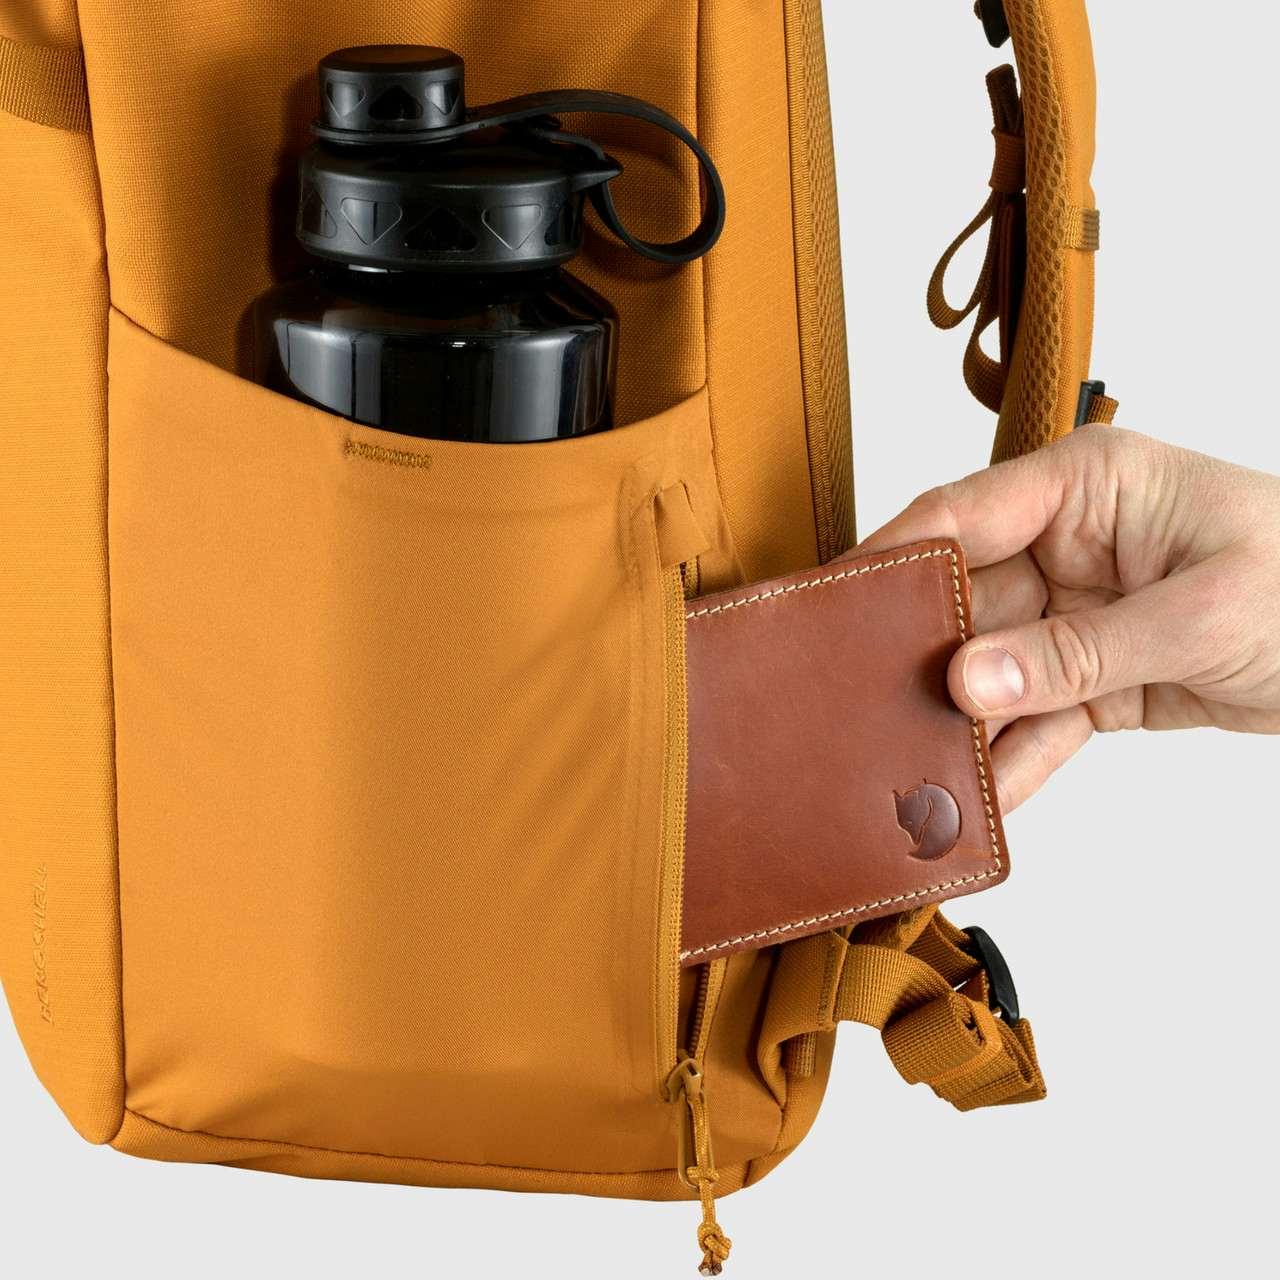 Ulvo Rolltop 30 Backpack Red Gold